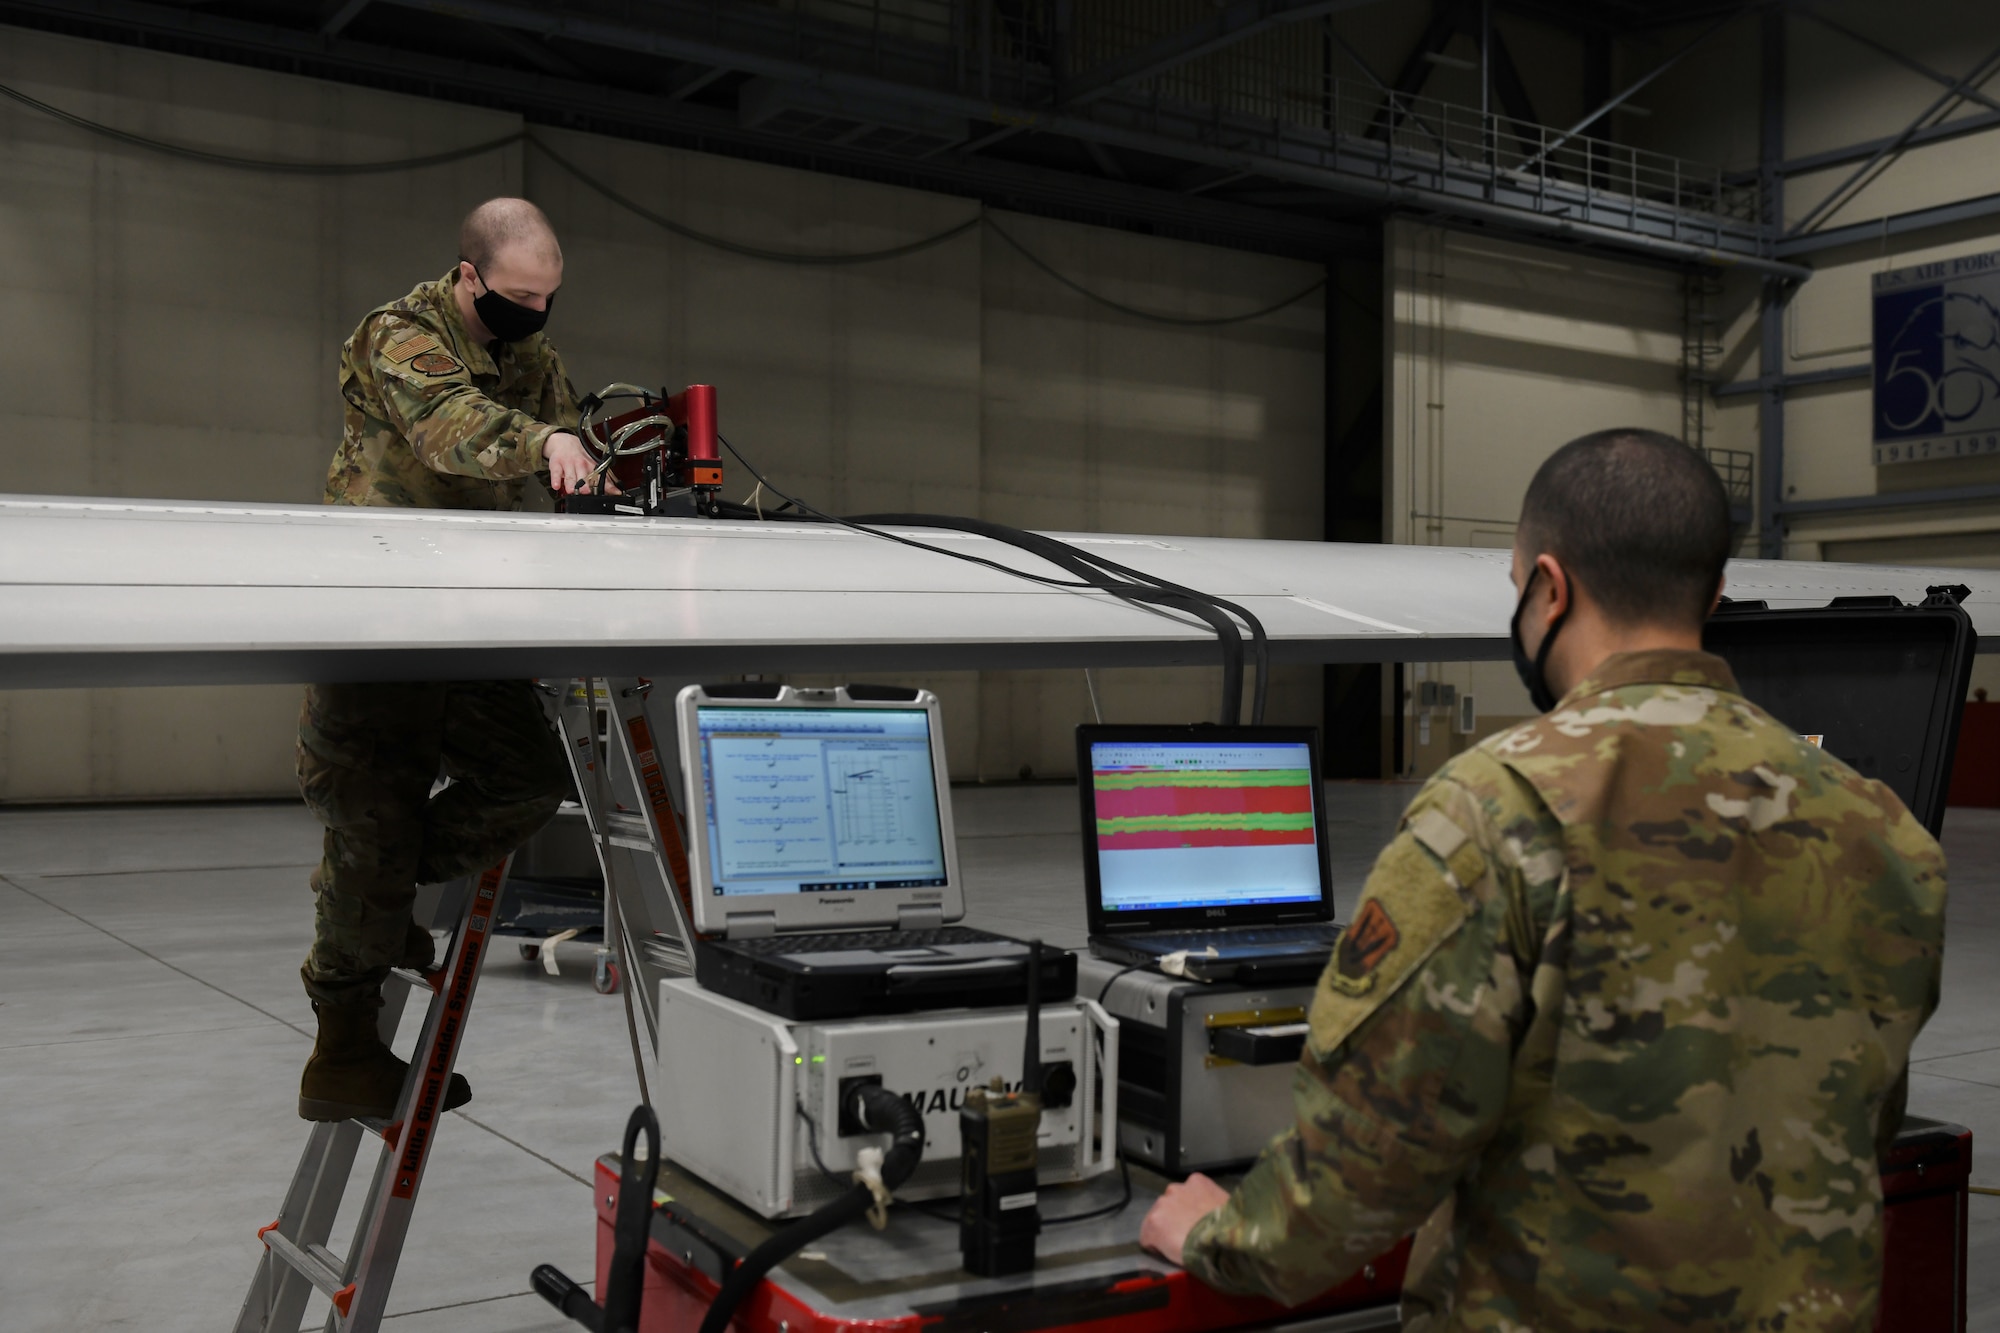 Airman First Class Seth Hardy, left/right, 319th Aircraft Maintenance Squadron nondestructive inspection journeyman, works alongside Senior Airman Harry Fraticelli, 319 AMXS NDI craftsman, to perform a scan using sound waves on the wing of an RQ-4 Global Hawk at Grand Forks Air Force Base, N.D., March 25, 2021. The scan is performed using a mobile automated scanner system as routine maintenance on the Global Hawk after every 150 flights. (U.S. Air Force photo by Airman 1st Class Ashley Richards)